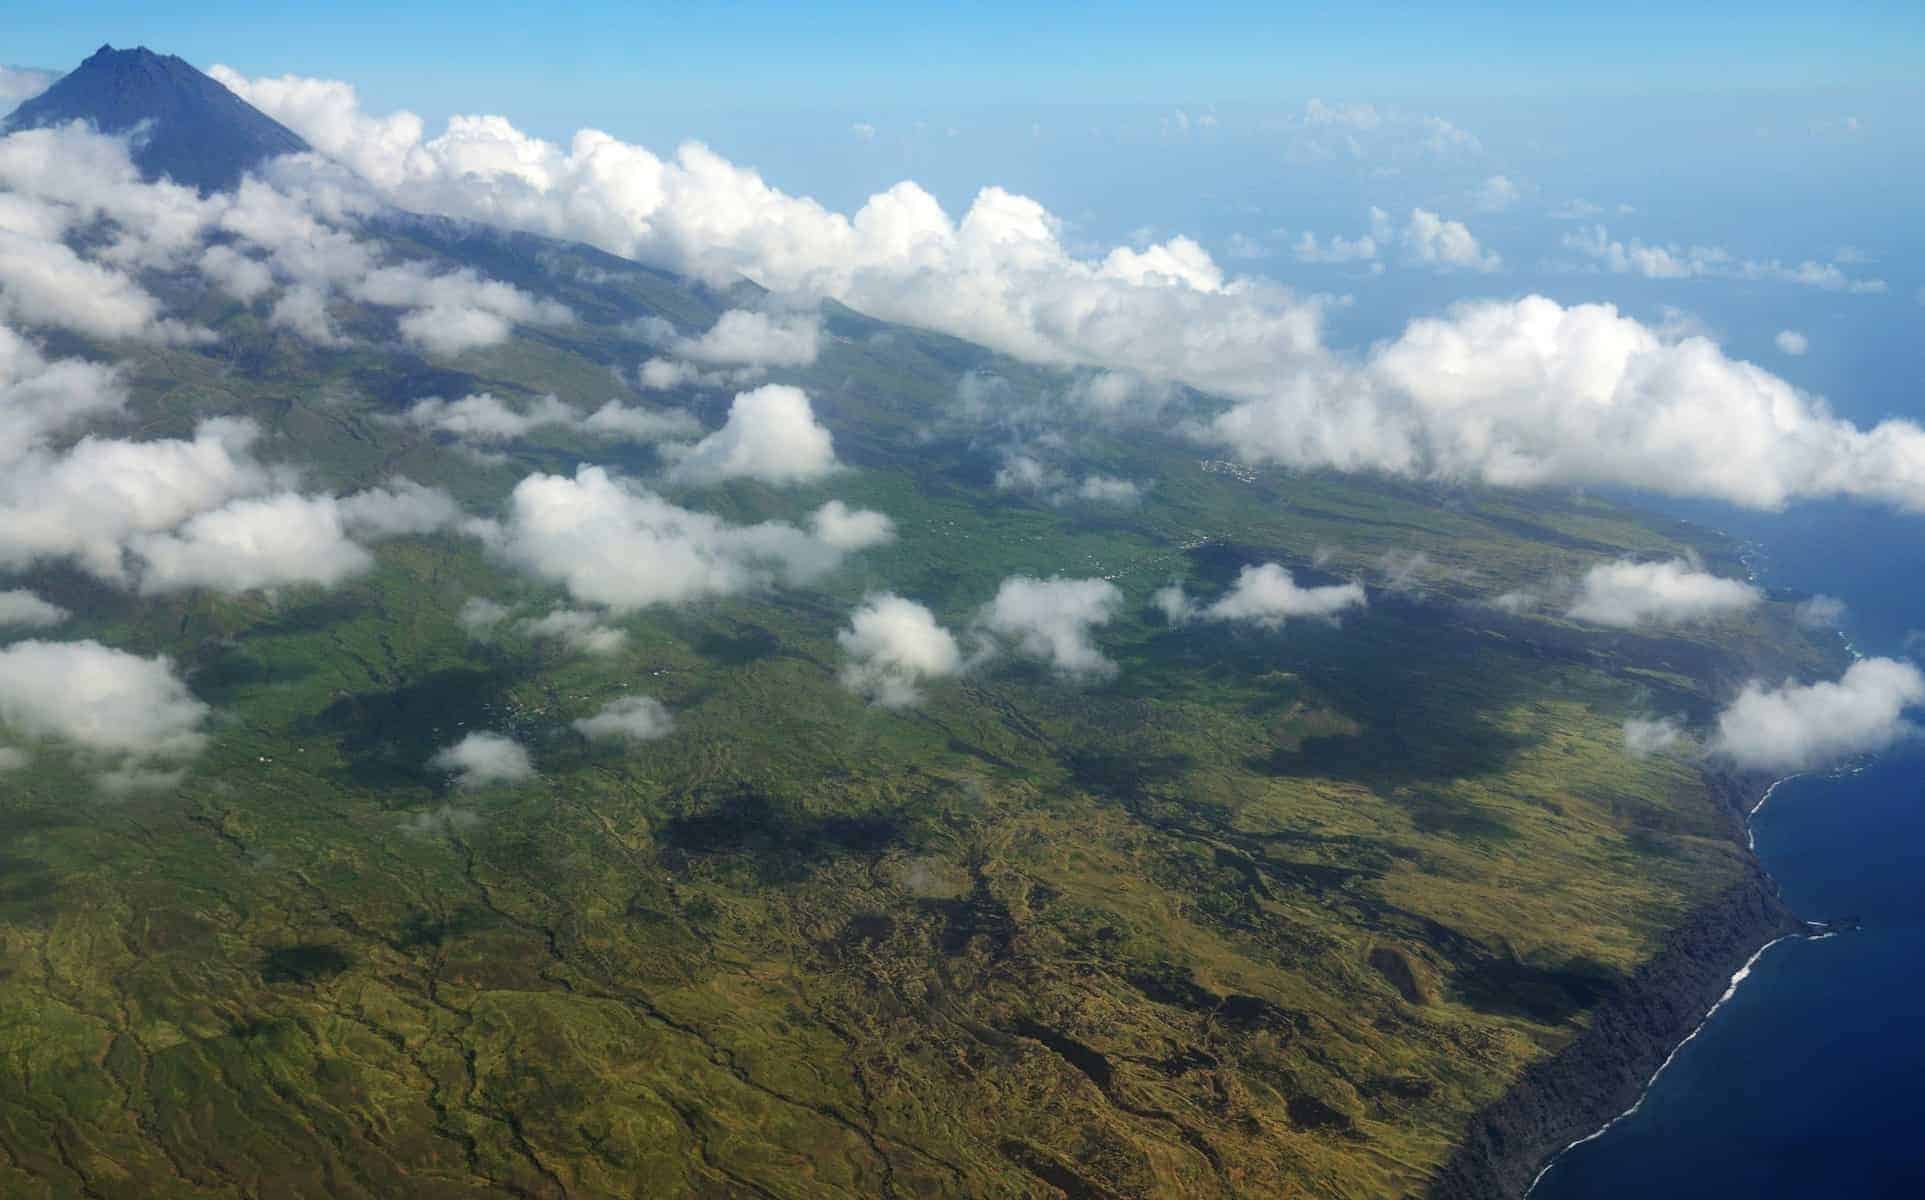 The island of Fogo, in Cabo Verde c0vered by white puffy clouds, as seen from aerial view on departure